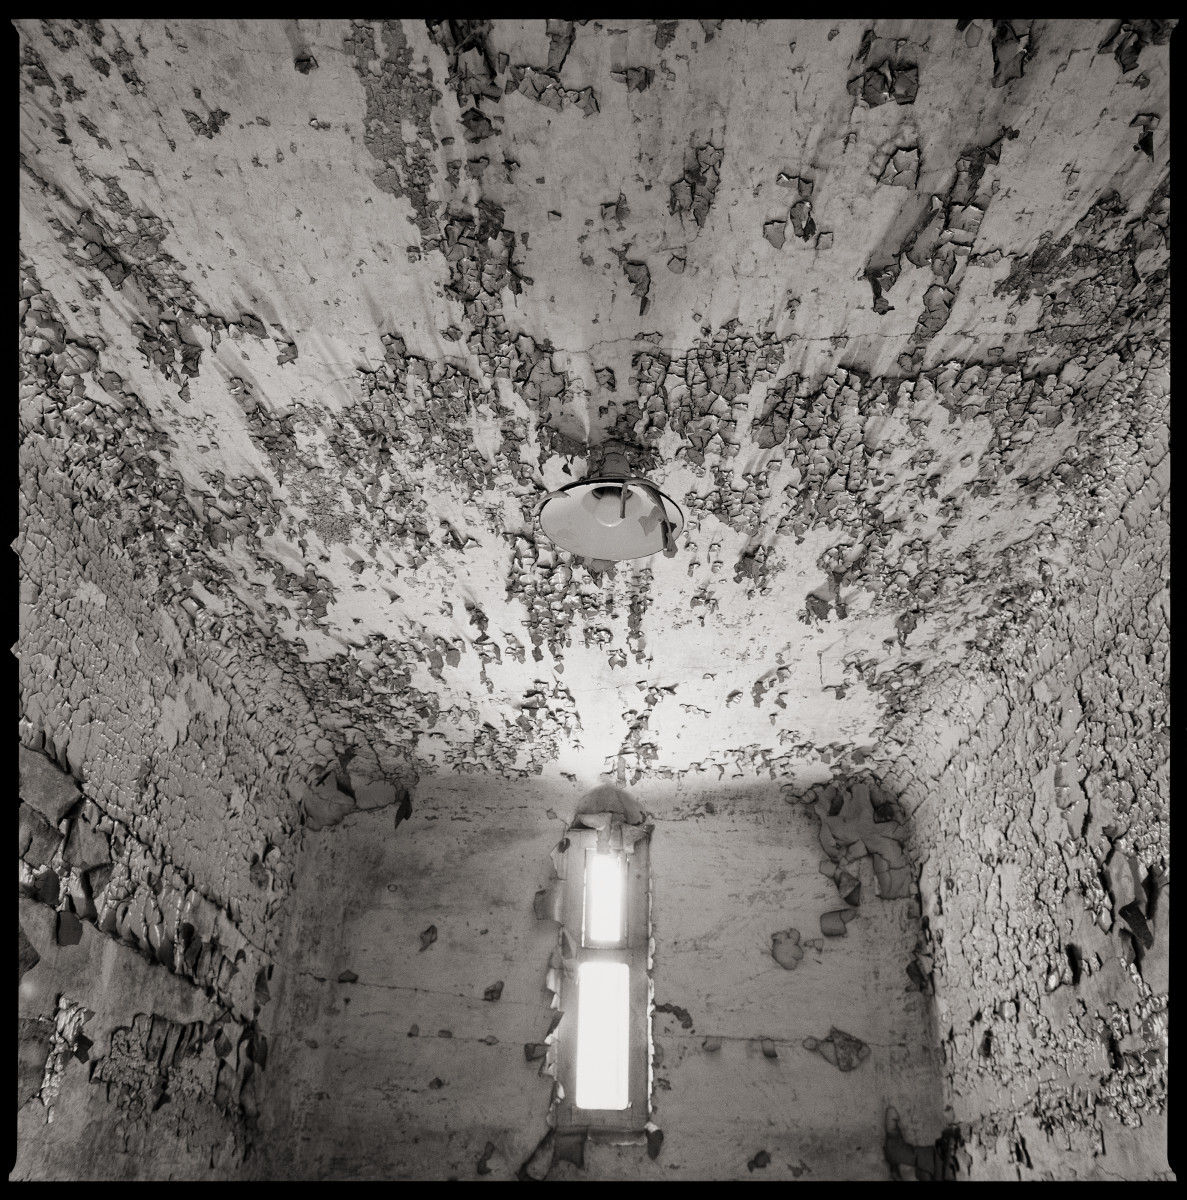 Untitled by Eric T. Kunsman  Image: ID: A black and white image shows an upward view of a room.  The walls and ceiling are cracked cement with peeling paint.  The back wall has a narrow window with a curved top.